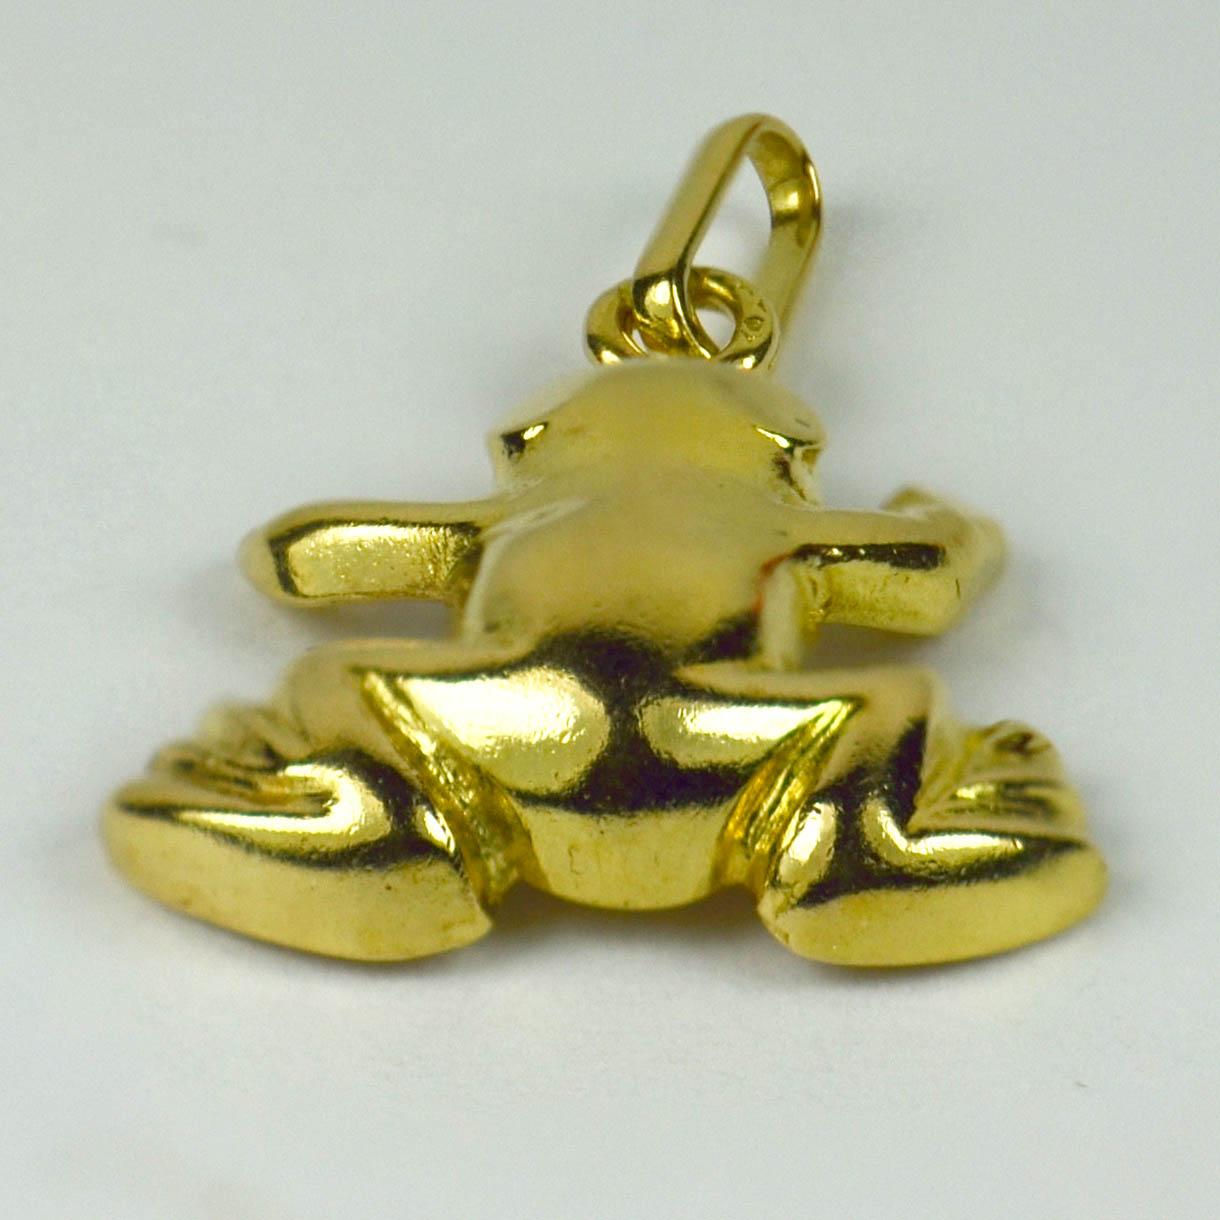 An 18 karat (18K) yellow gold charm pendant designed as a three dimensional frog. Stamped with the eagle's head mark for French manufacture and 18 karat gold.

Dimensions: 2 x 1.5 x 0.5 cm
Weight: 1.25 grams